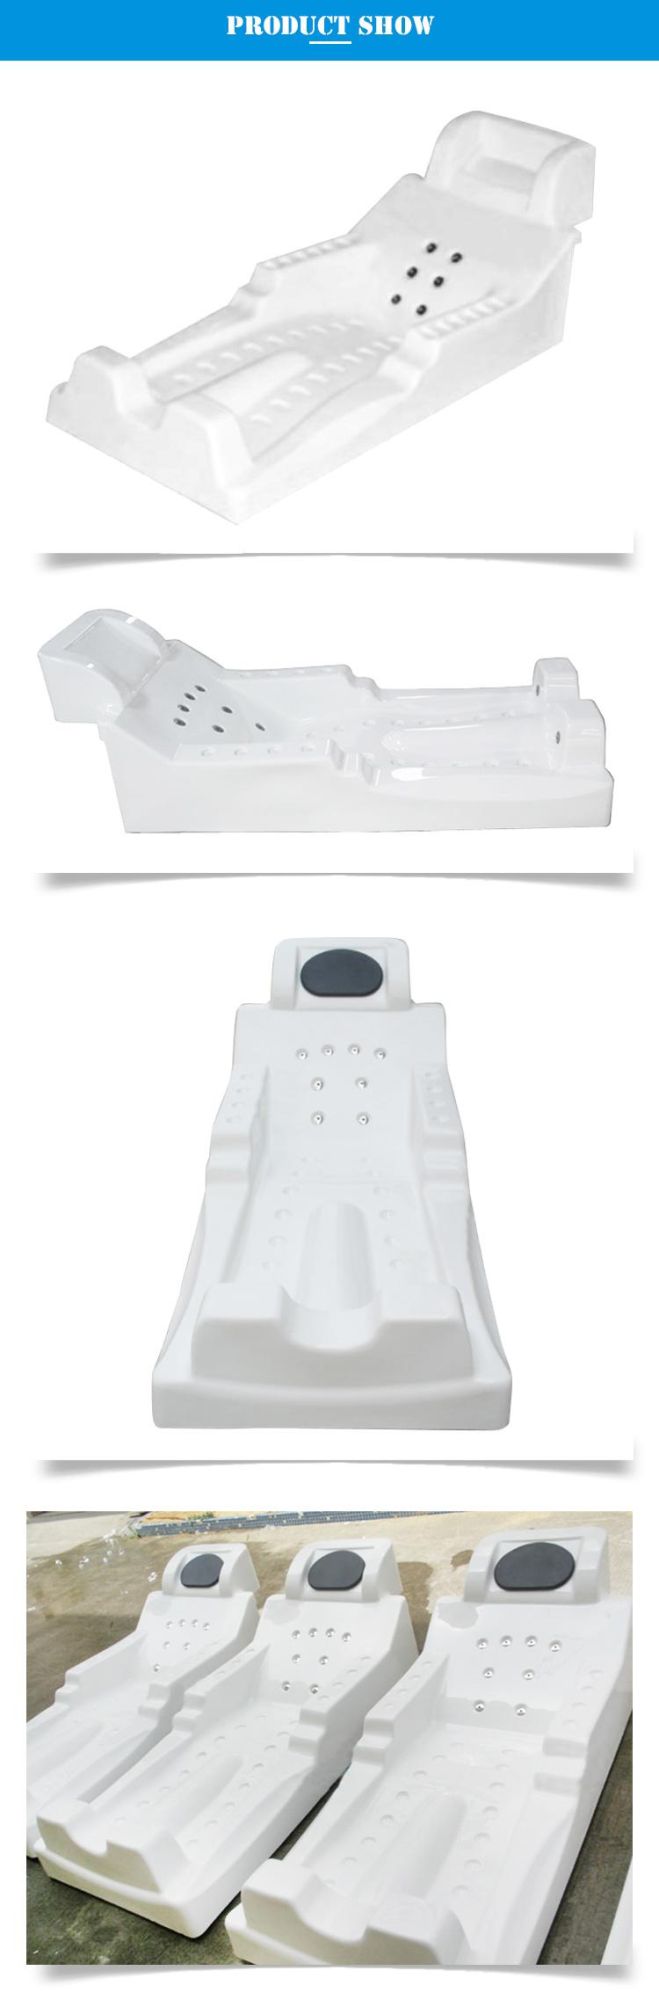 SPA Hydrotherapy Water Jet Massage Bed